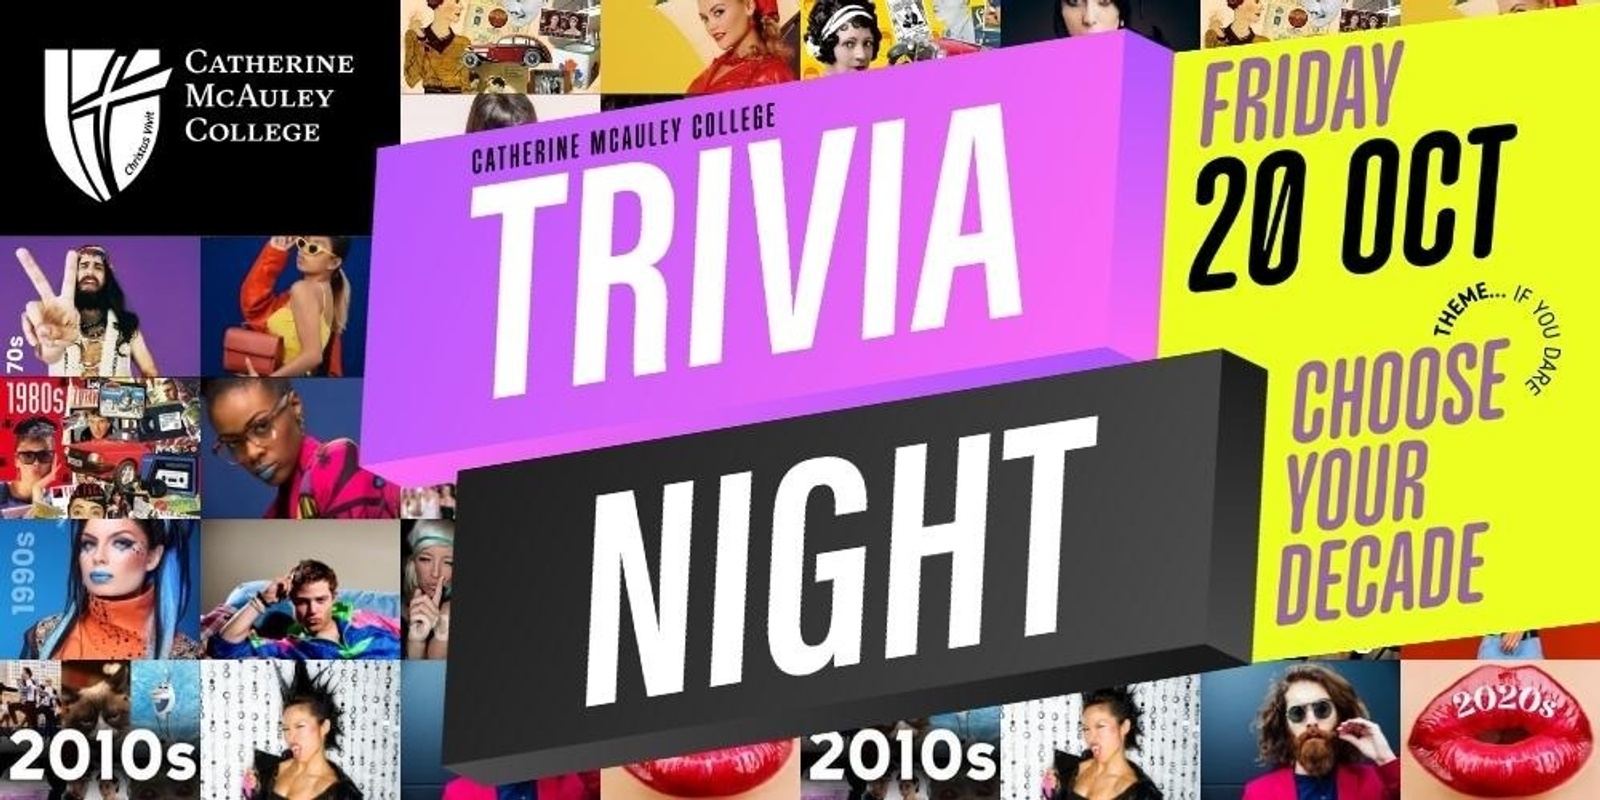 Banner image for Catherine McAuley College Trivia Night - Choose your decade!